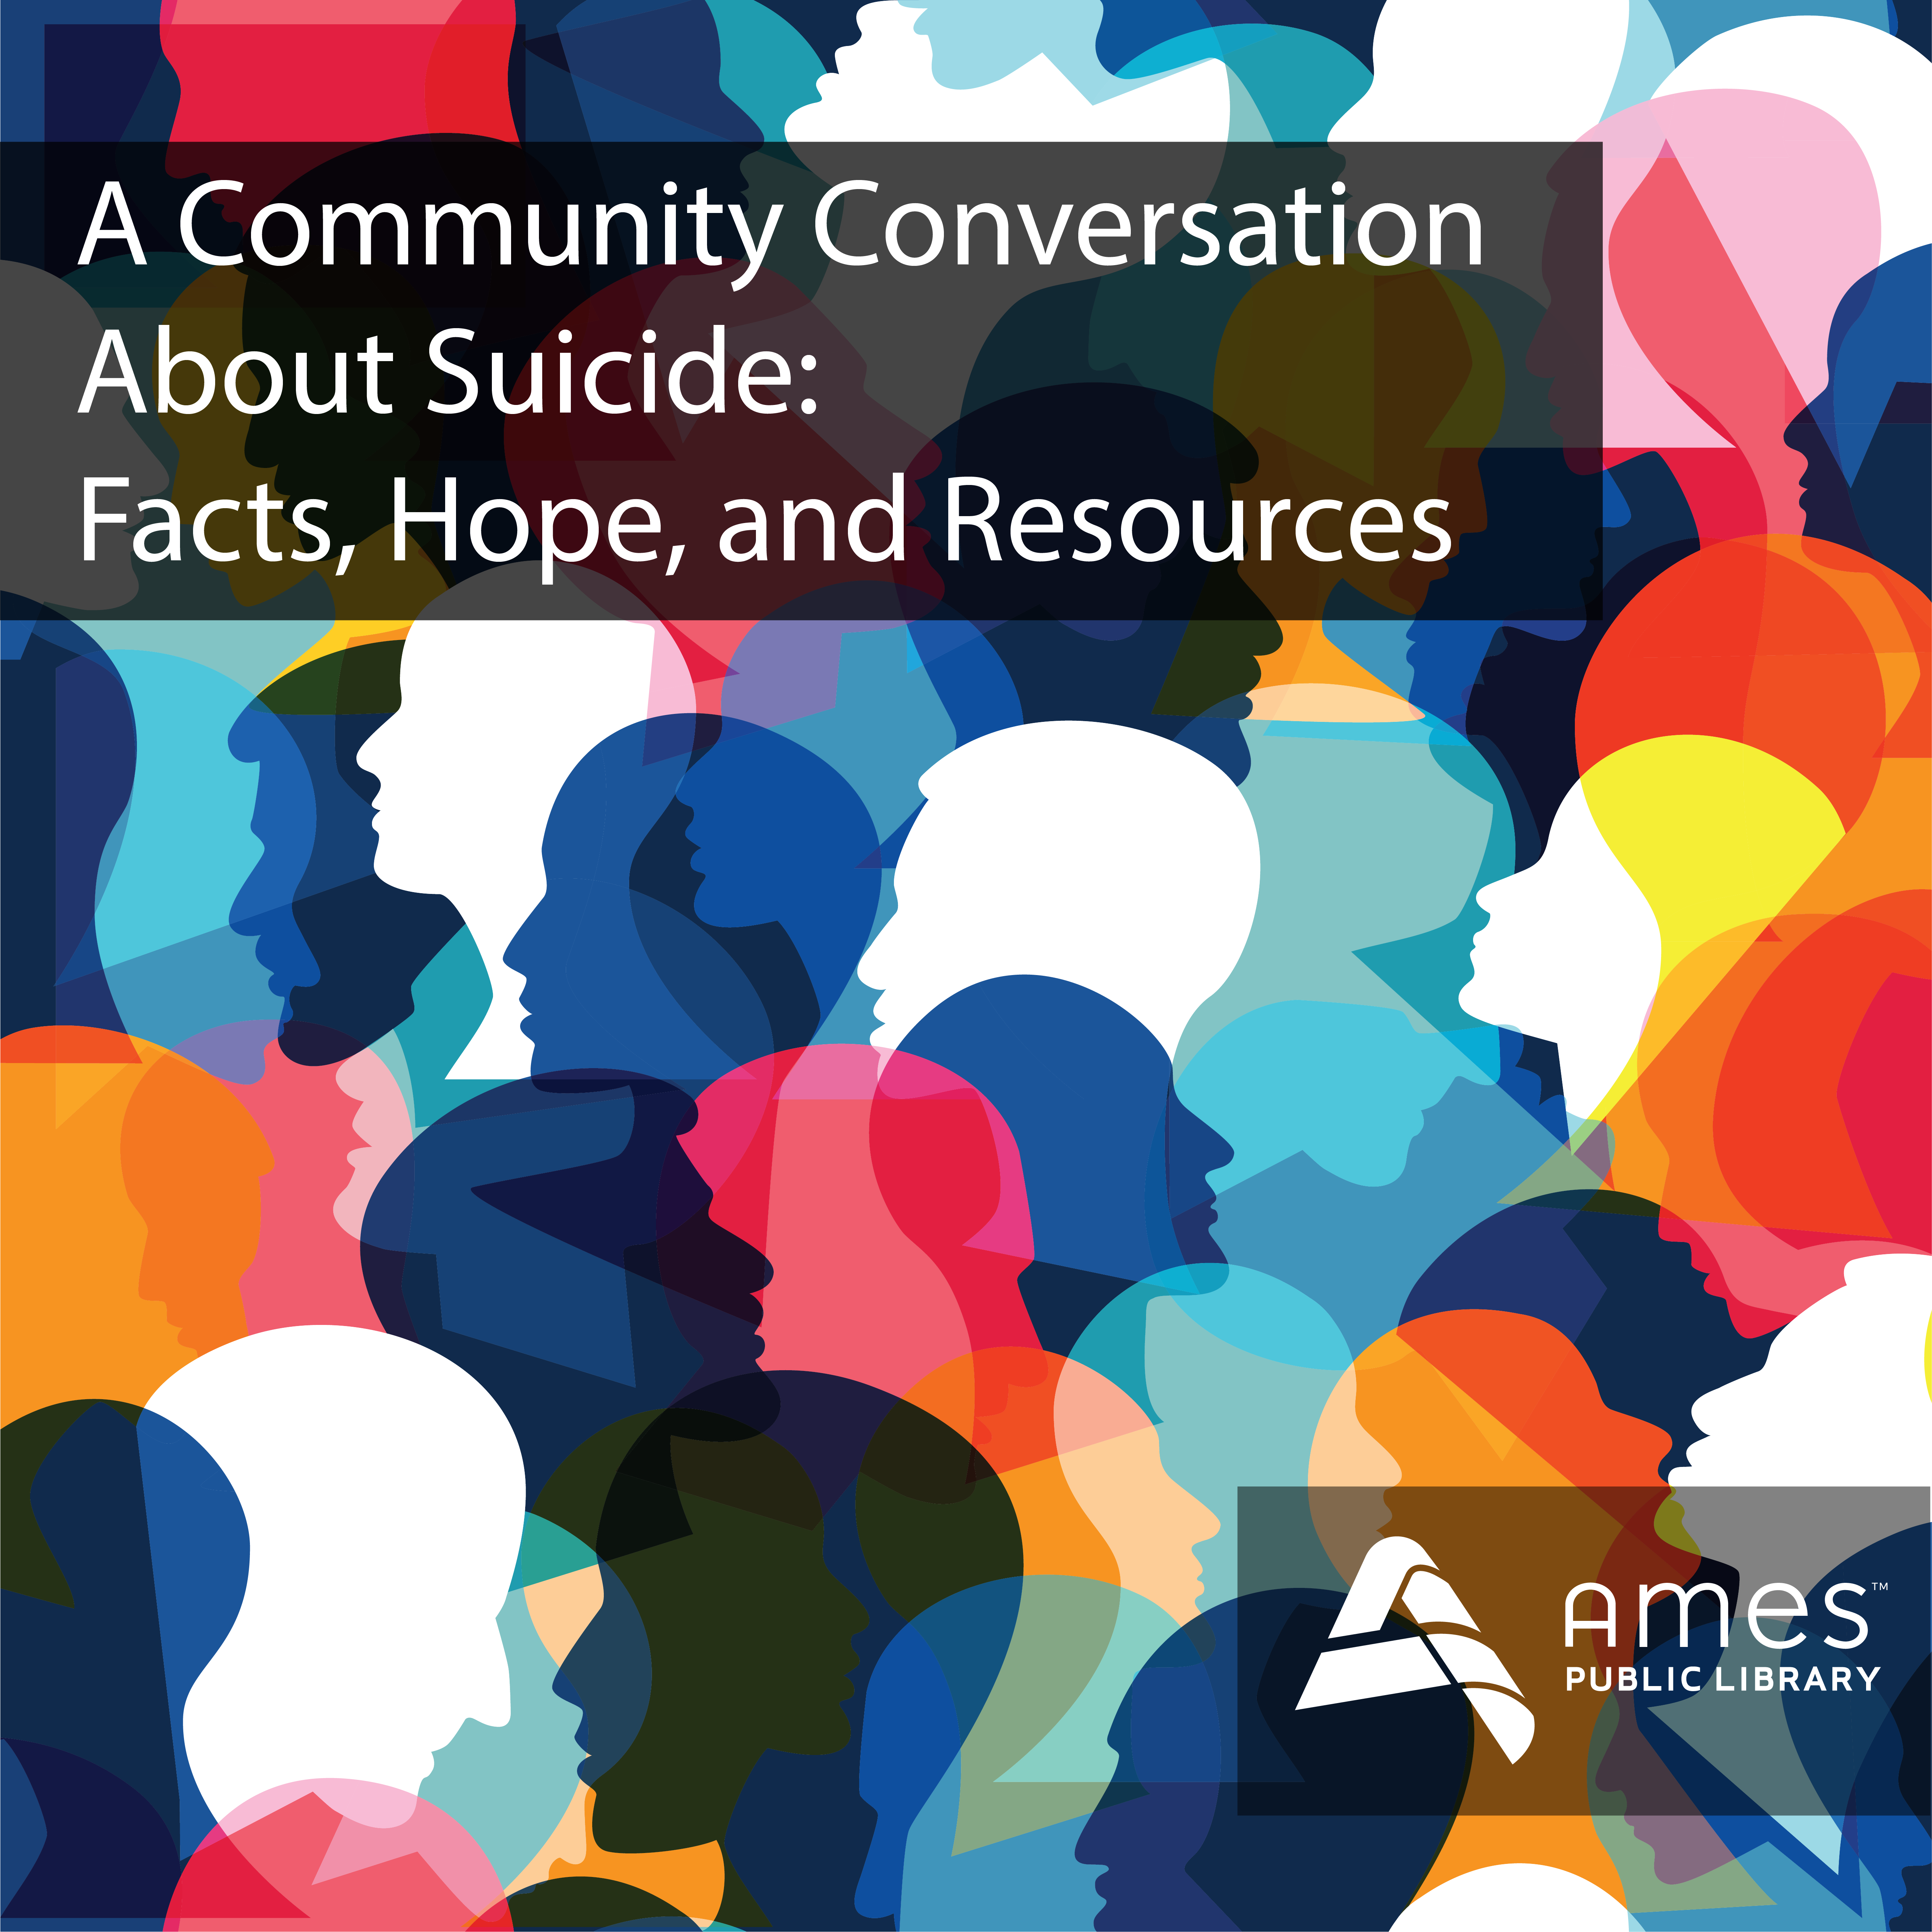 A Community Conversation About Suicide: Facts, Hope, and Resources. Image features abstract overlapping faces in various colors